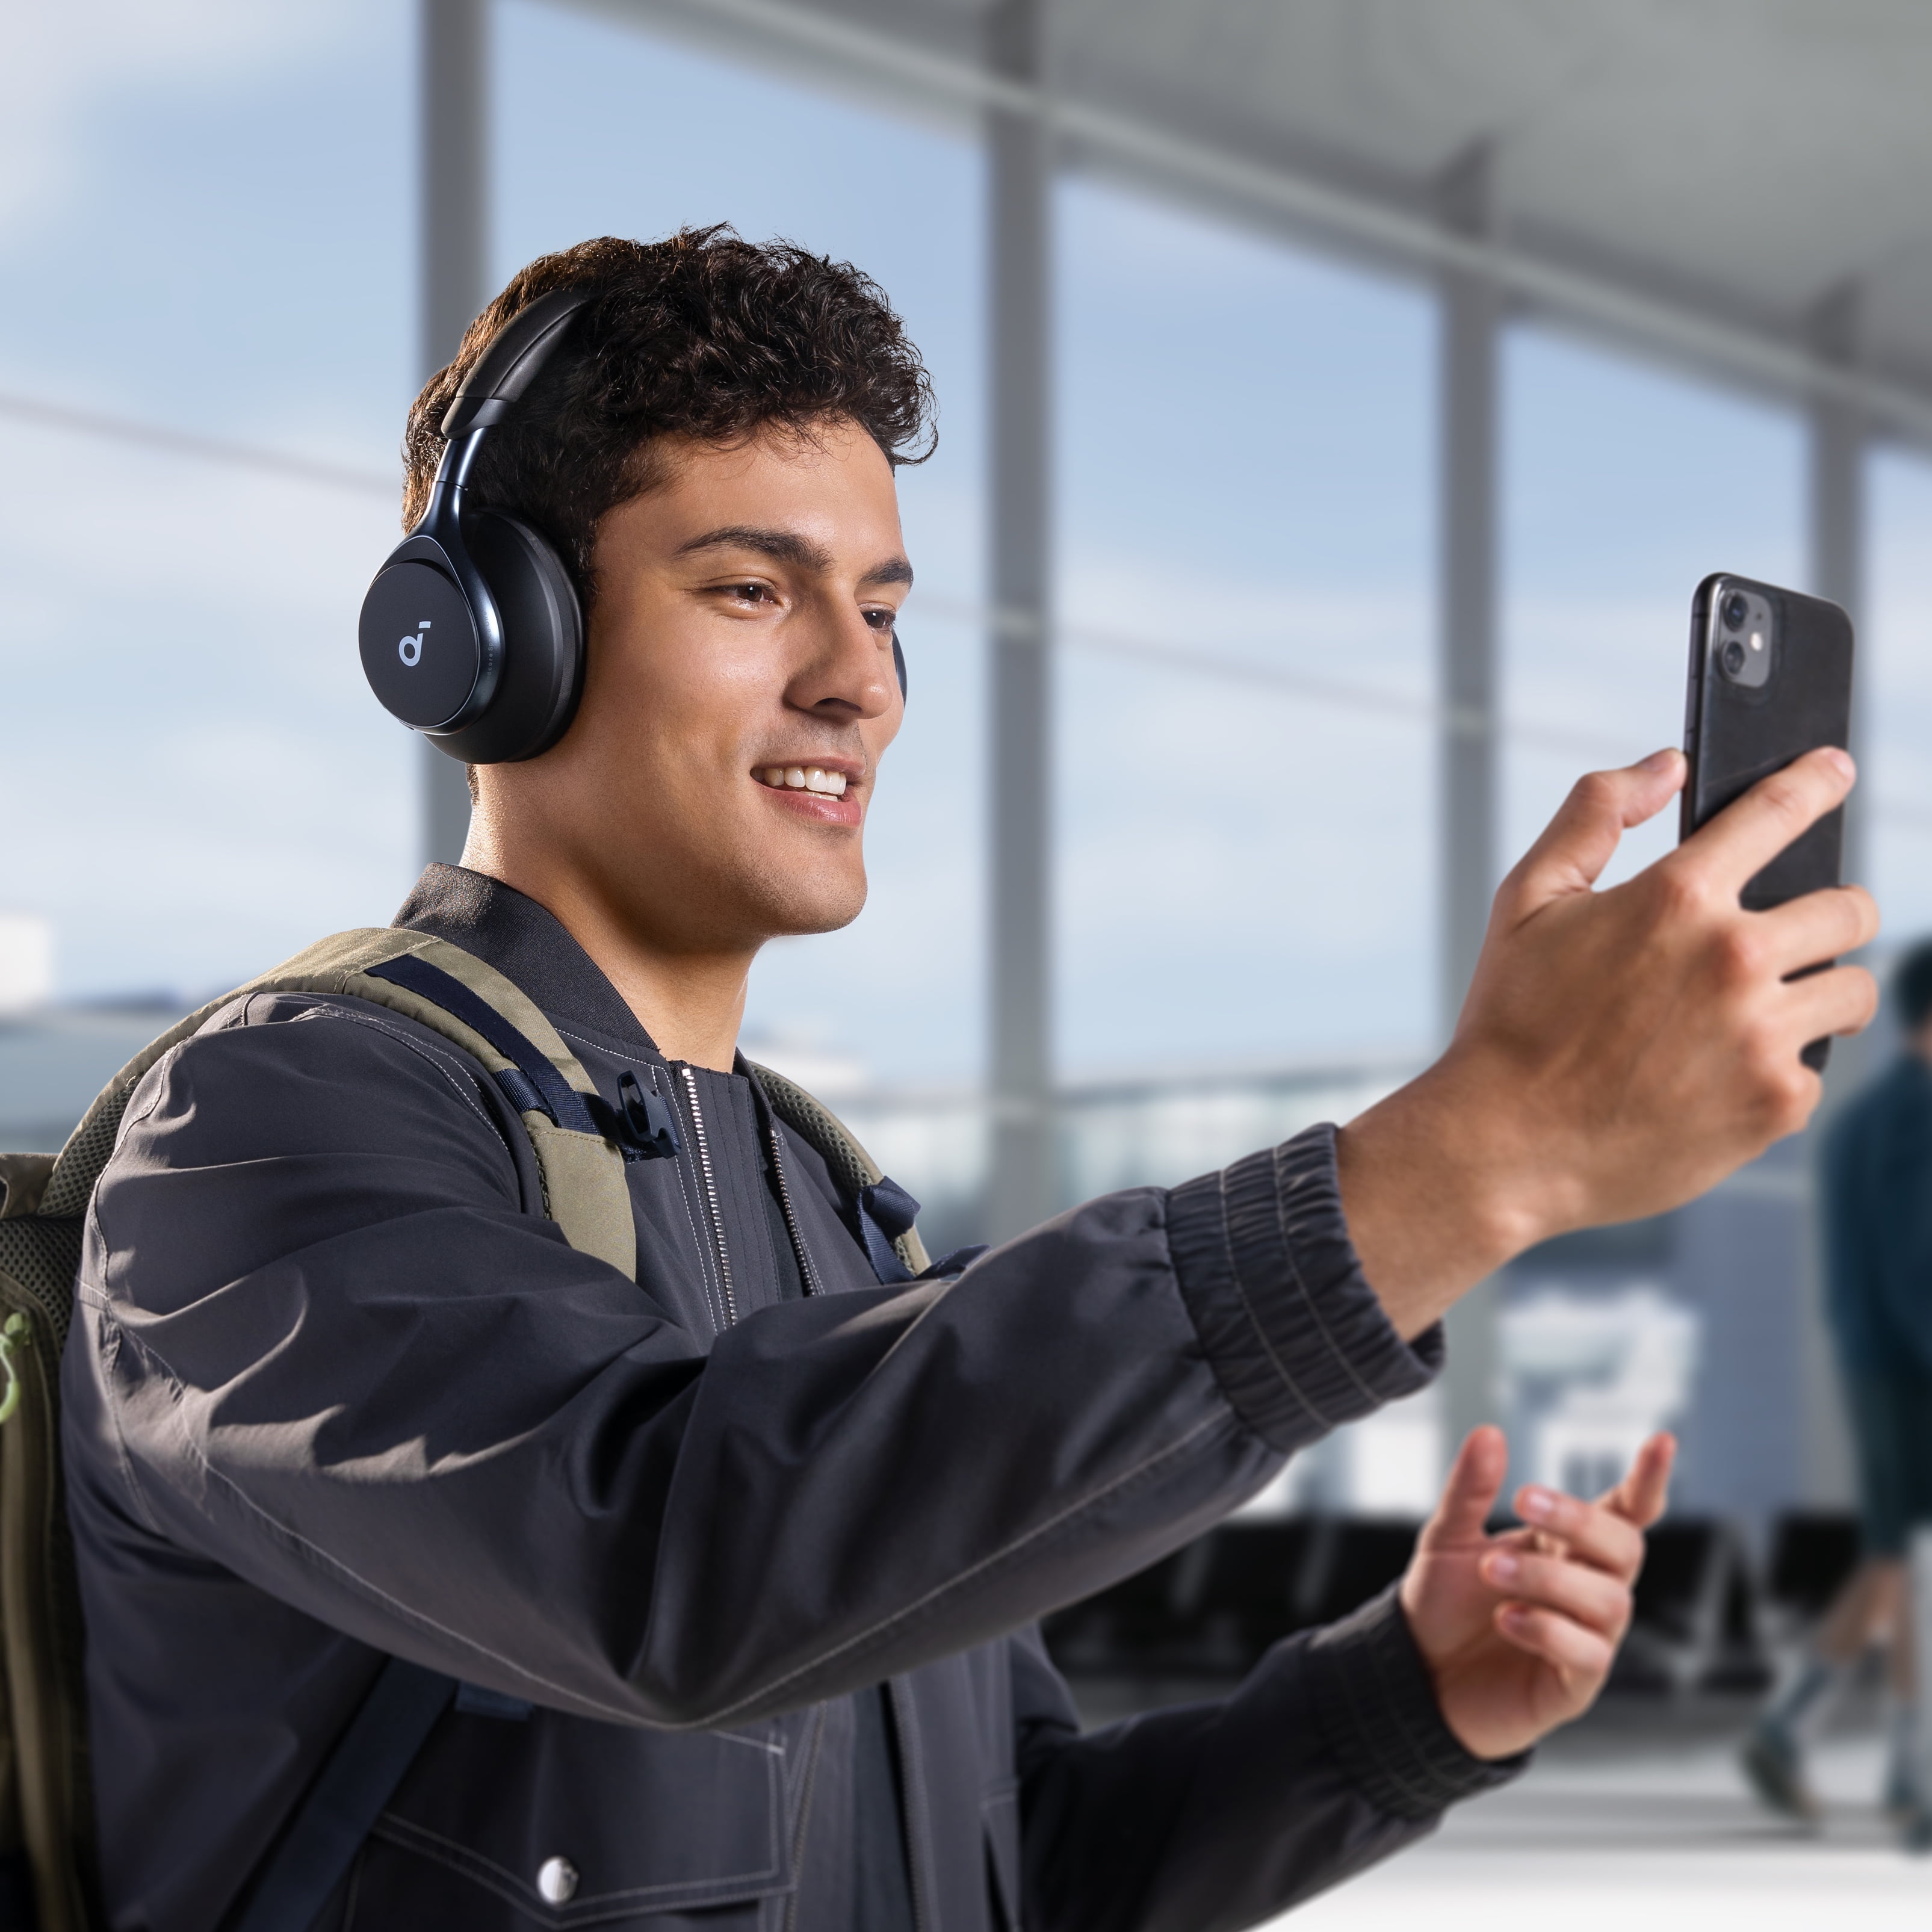 Soundcore by Anker, Space One, Active Noise Cancelling Headphones, 2X  Stronger Voice Reduction, 40H ANC Playtime, App Control, LDAC Hi-Res  Wireless